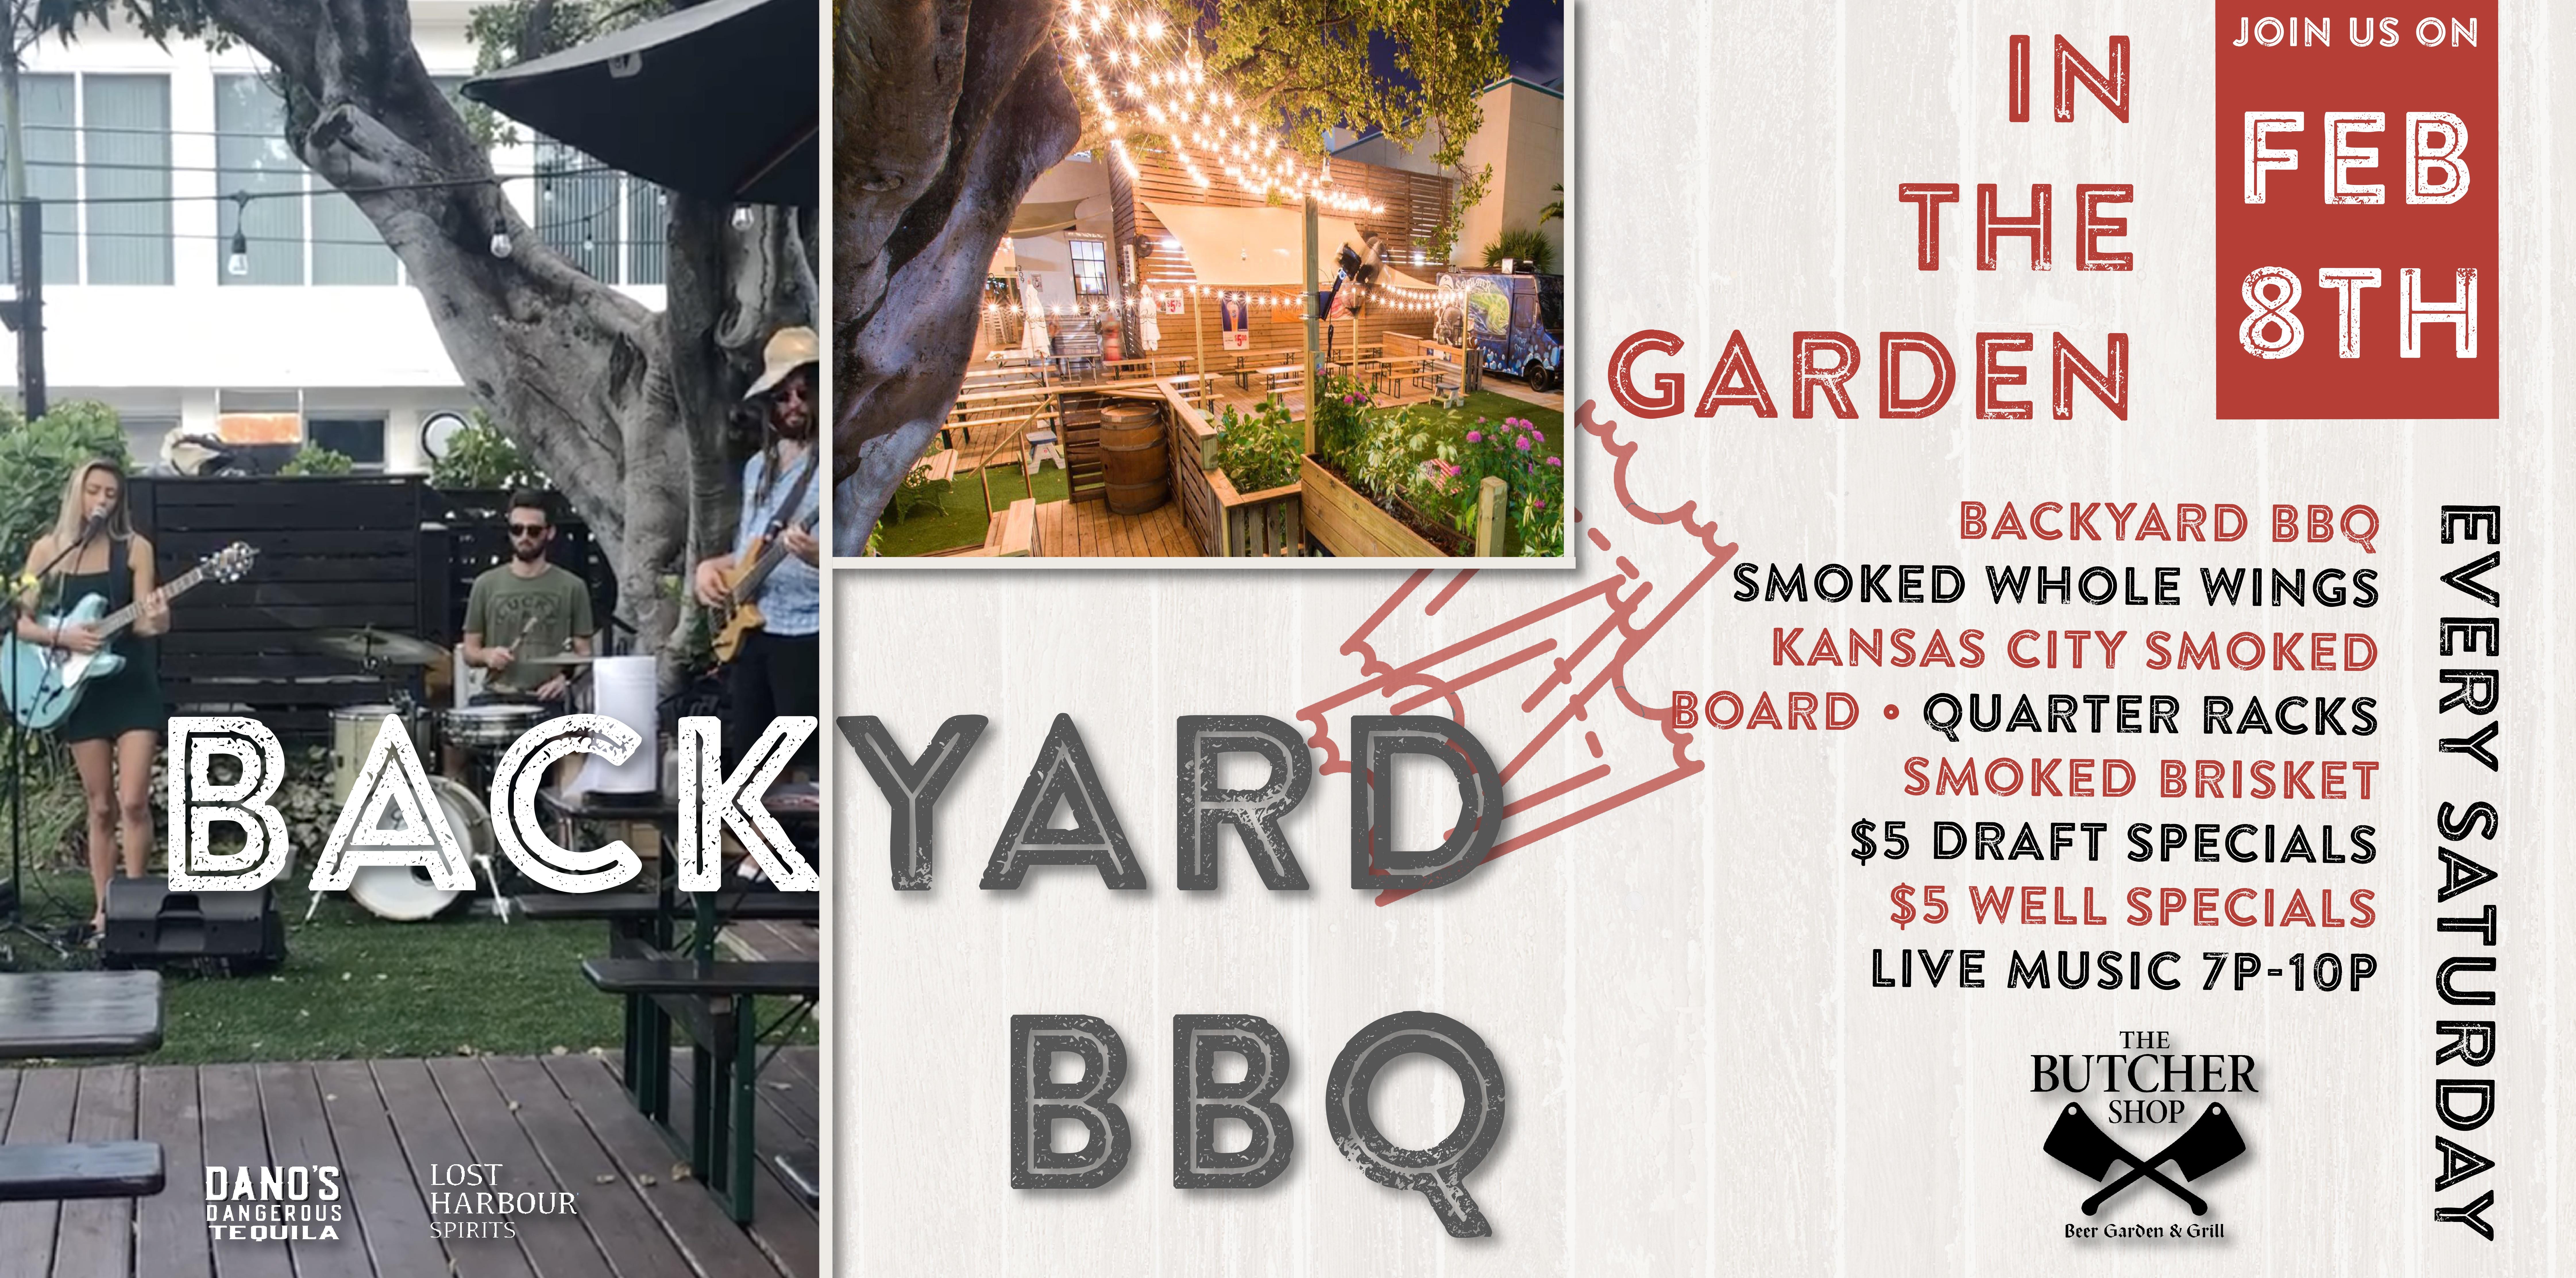 Live Music & Backyard BBQ in the Garden at The Butcher Shop